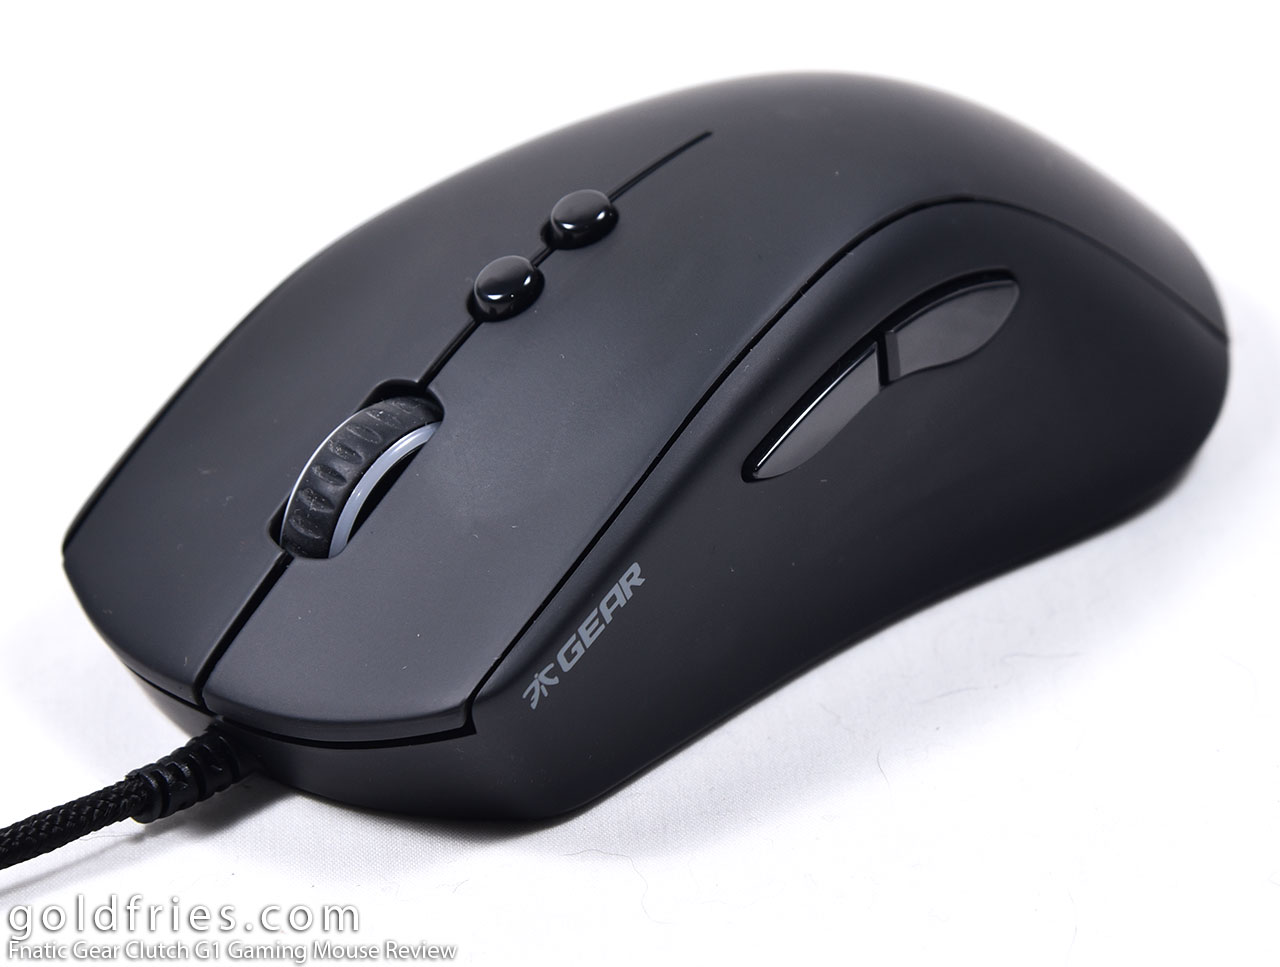 Fnatic Gear Clutch G1 Gaming Mouse Review